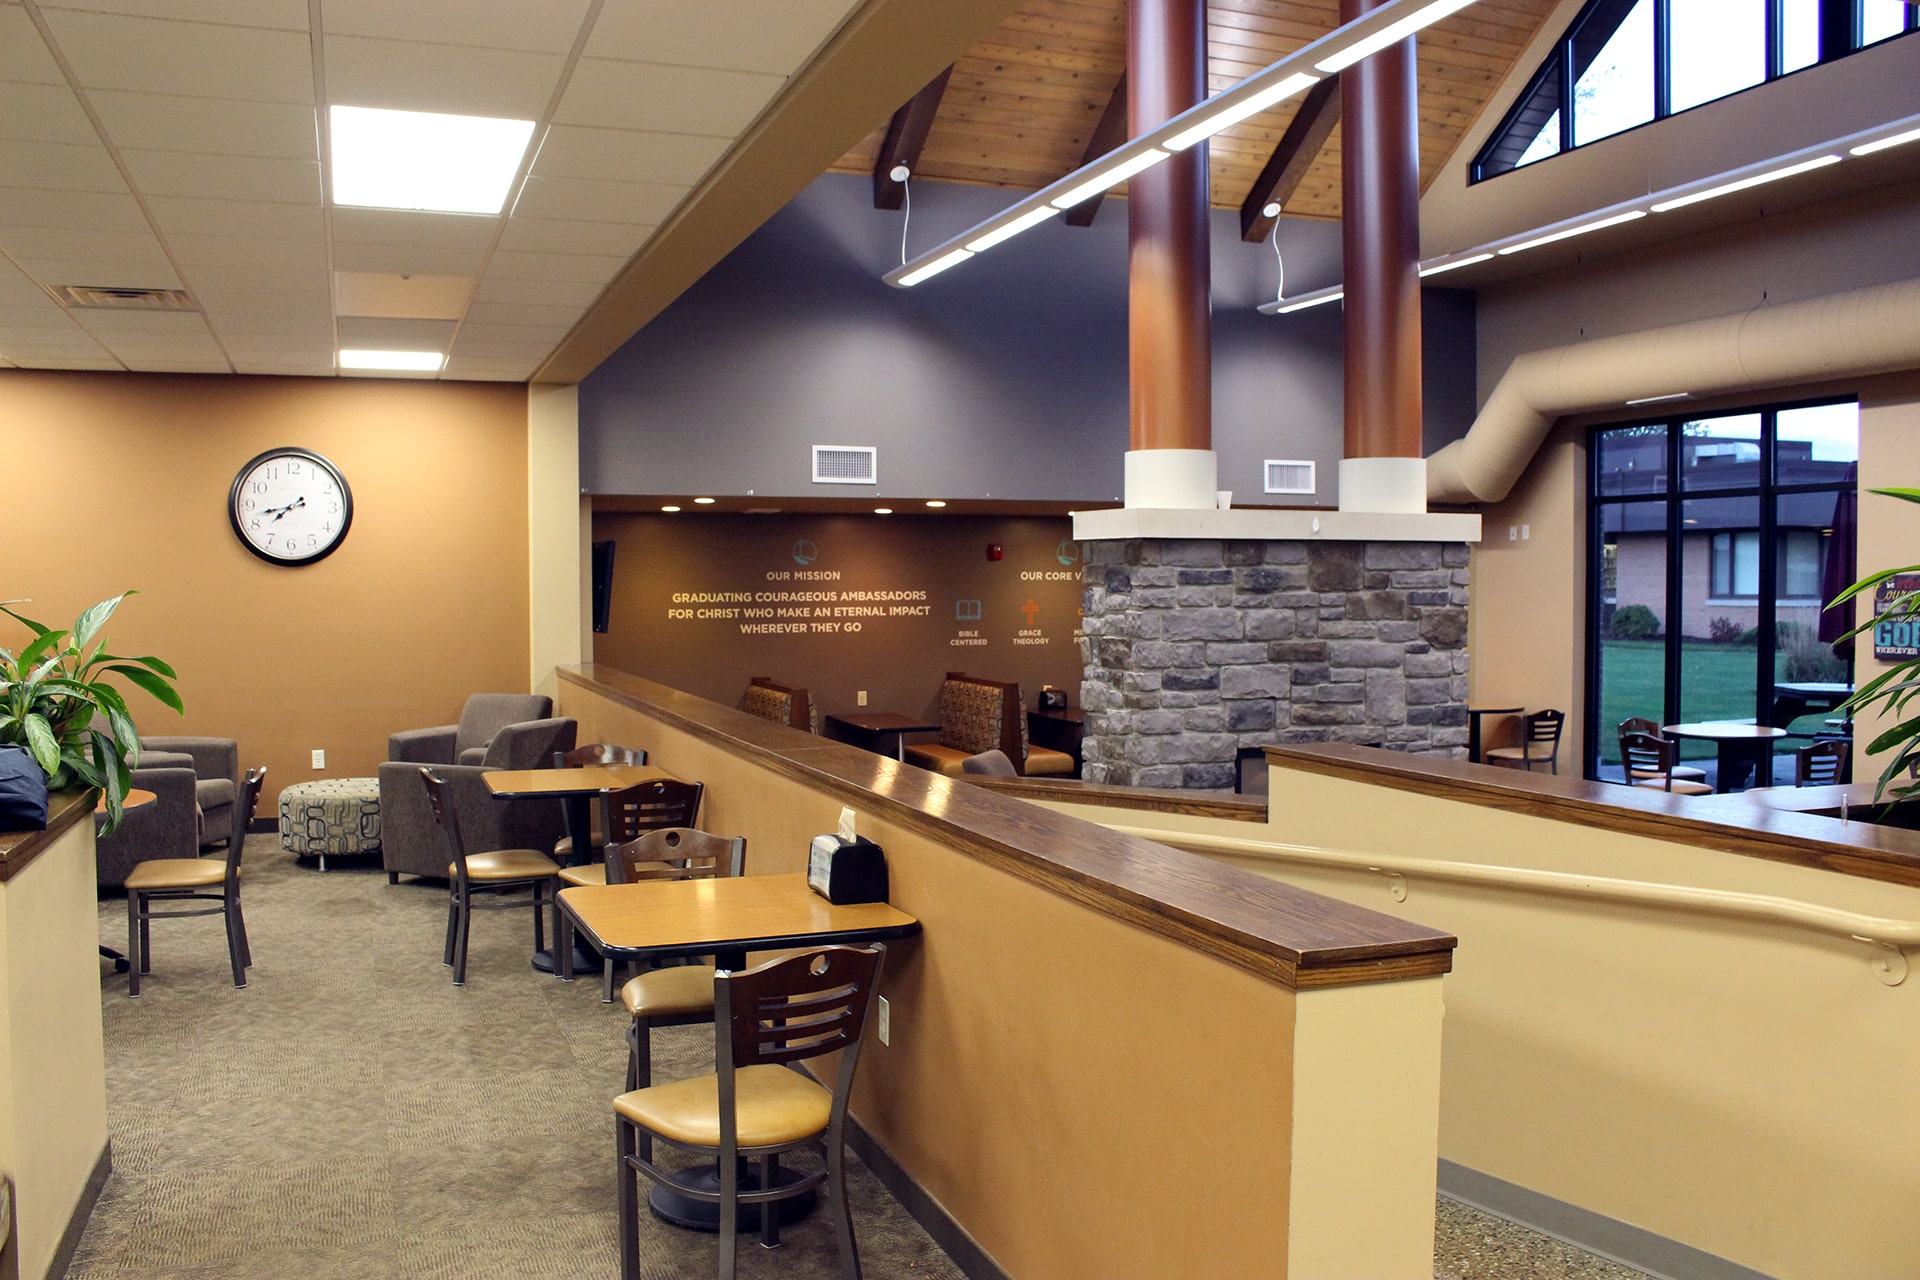 Interior view of the Commons at Grace Christian University